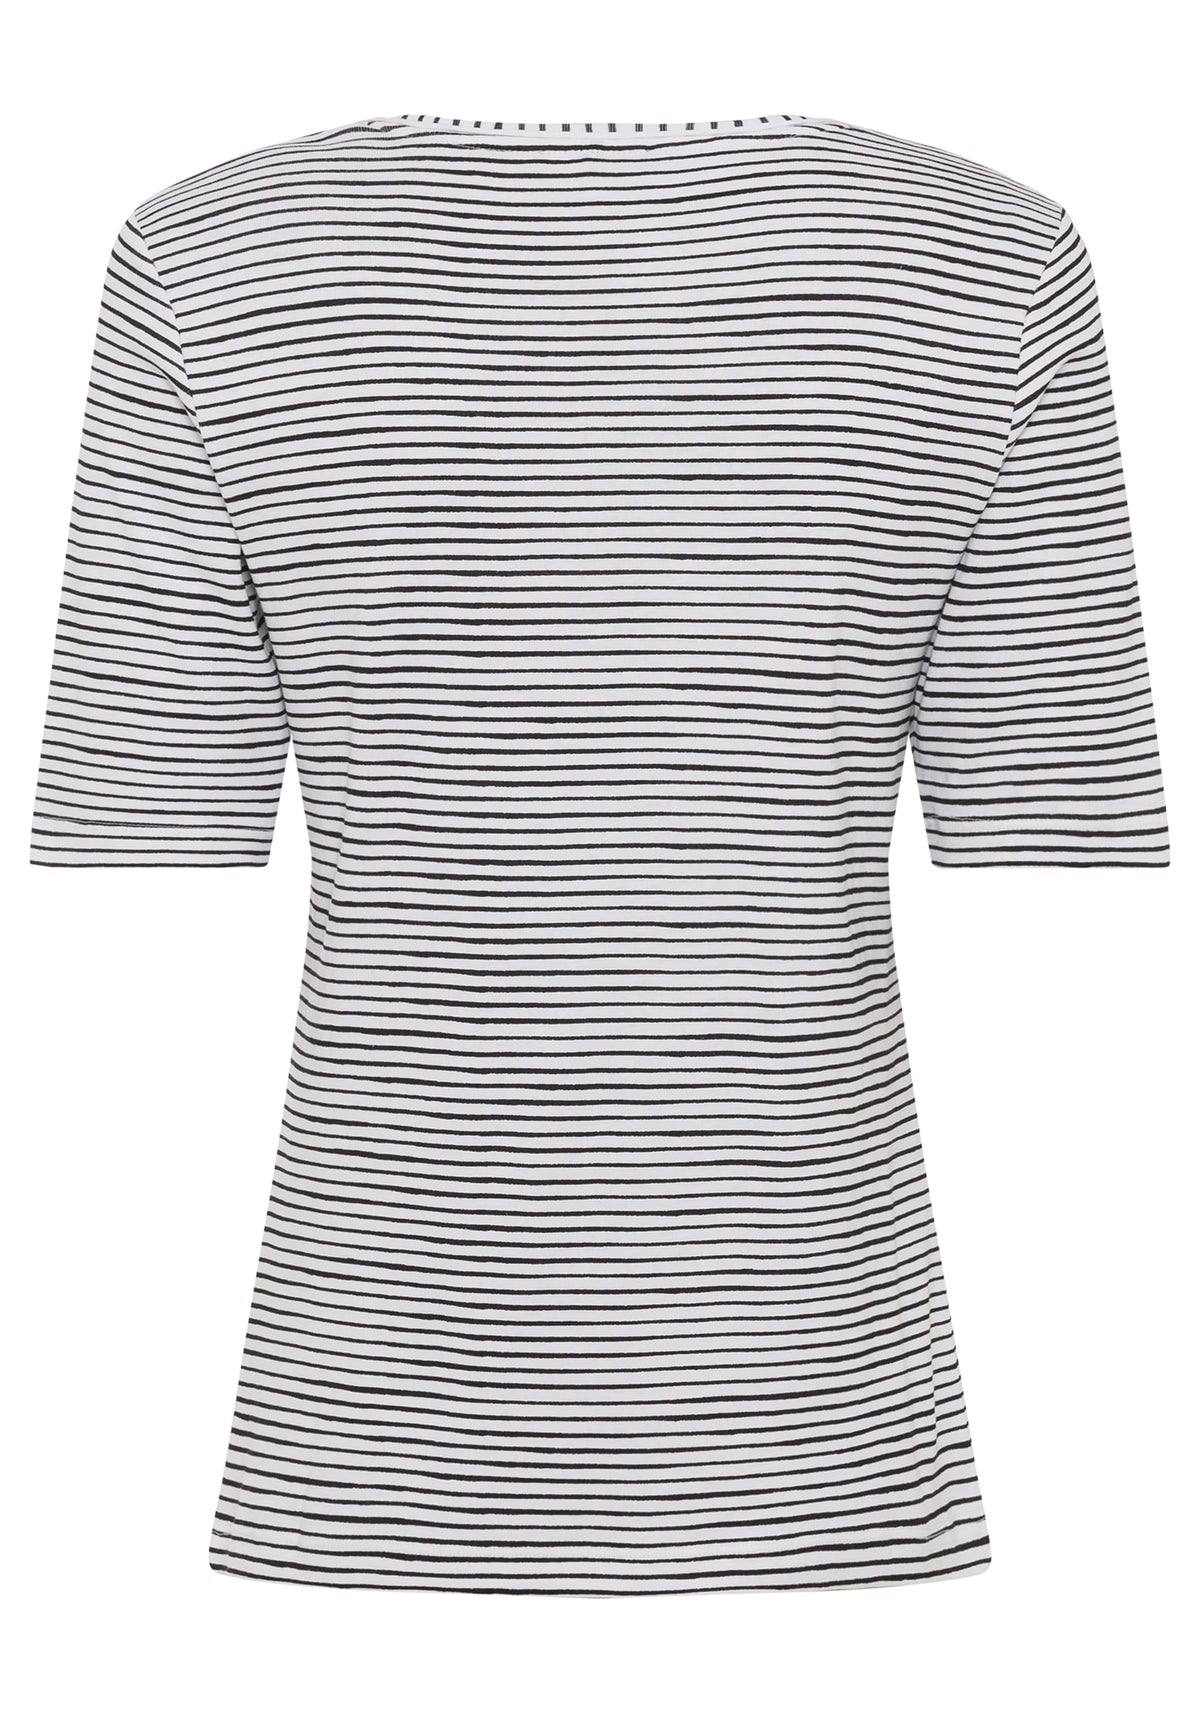 100% Cotton Short Sleeve Stripe and Placement Print T-Shirt